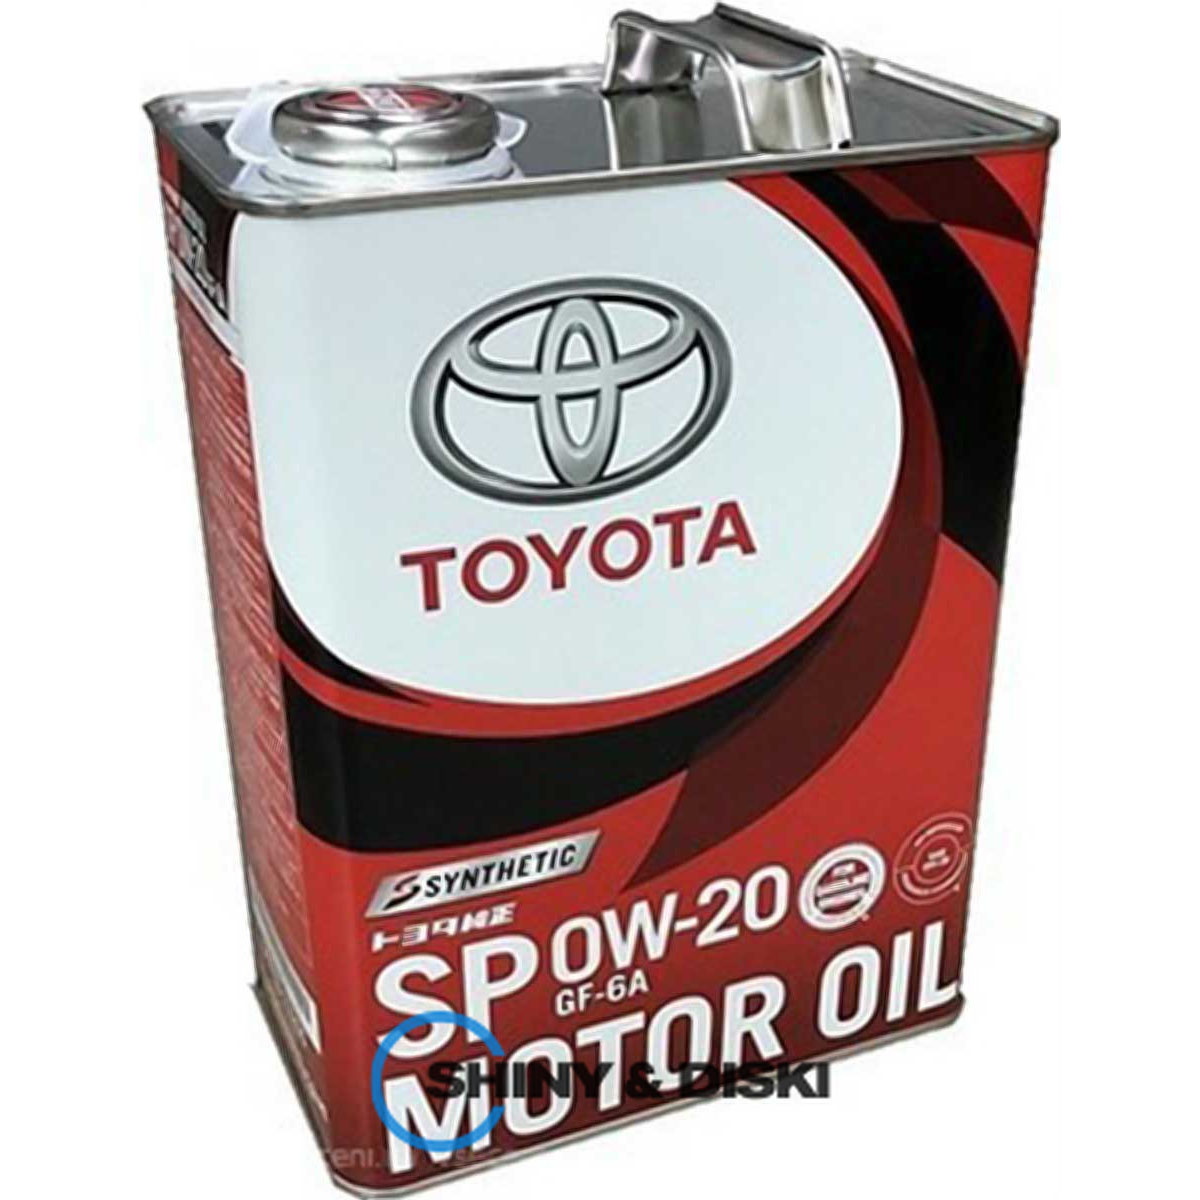 toyota synthetic motor oil 0w-20 sp/gf-6a (4л)